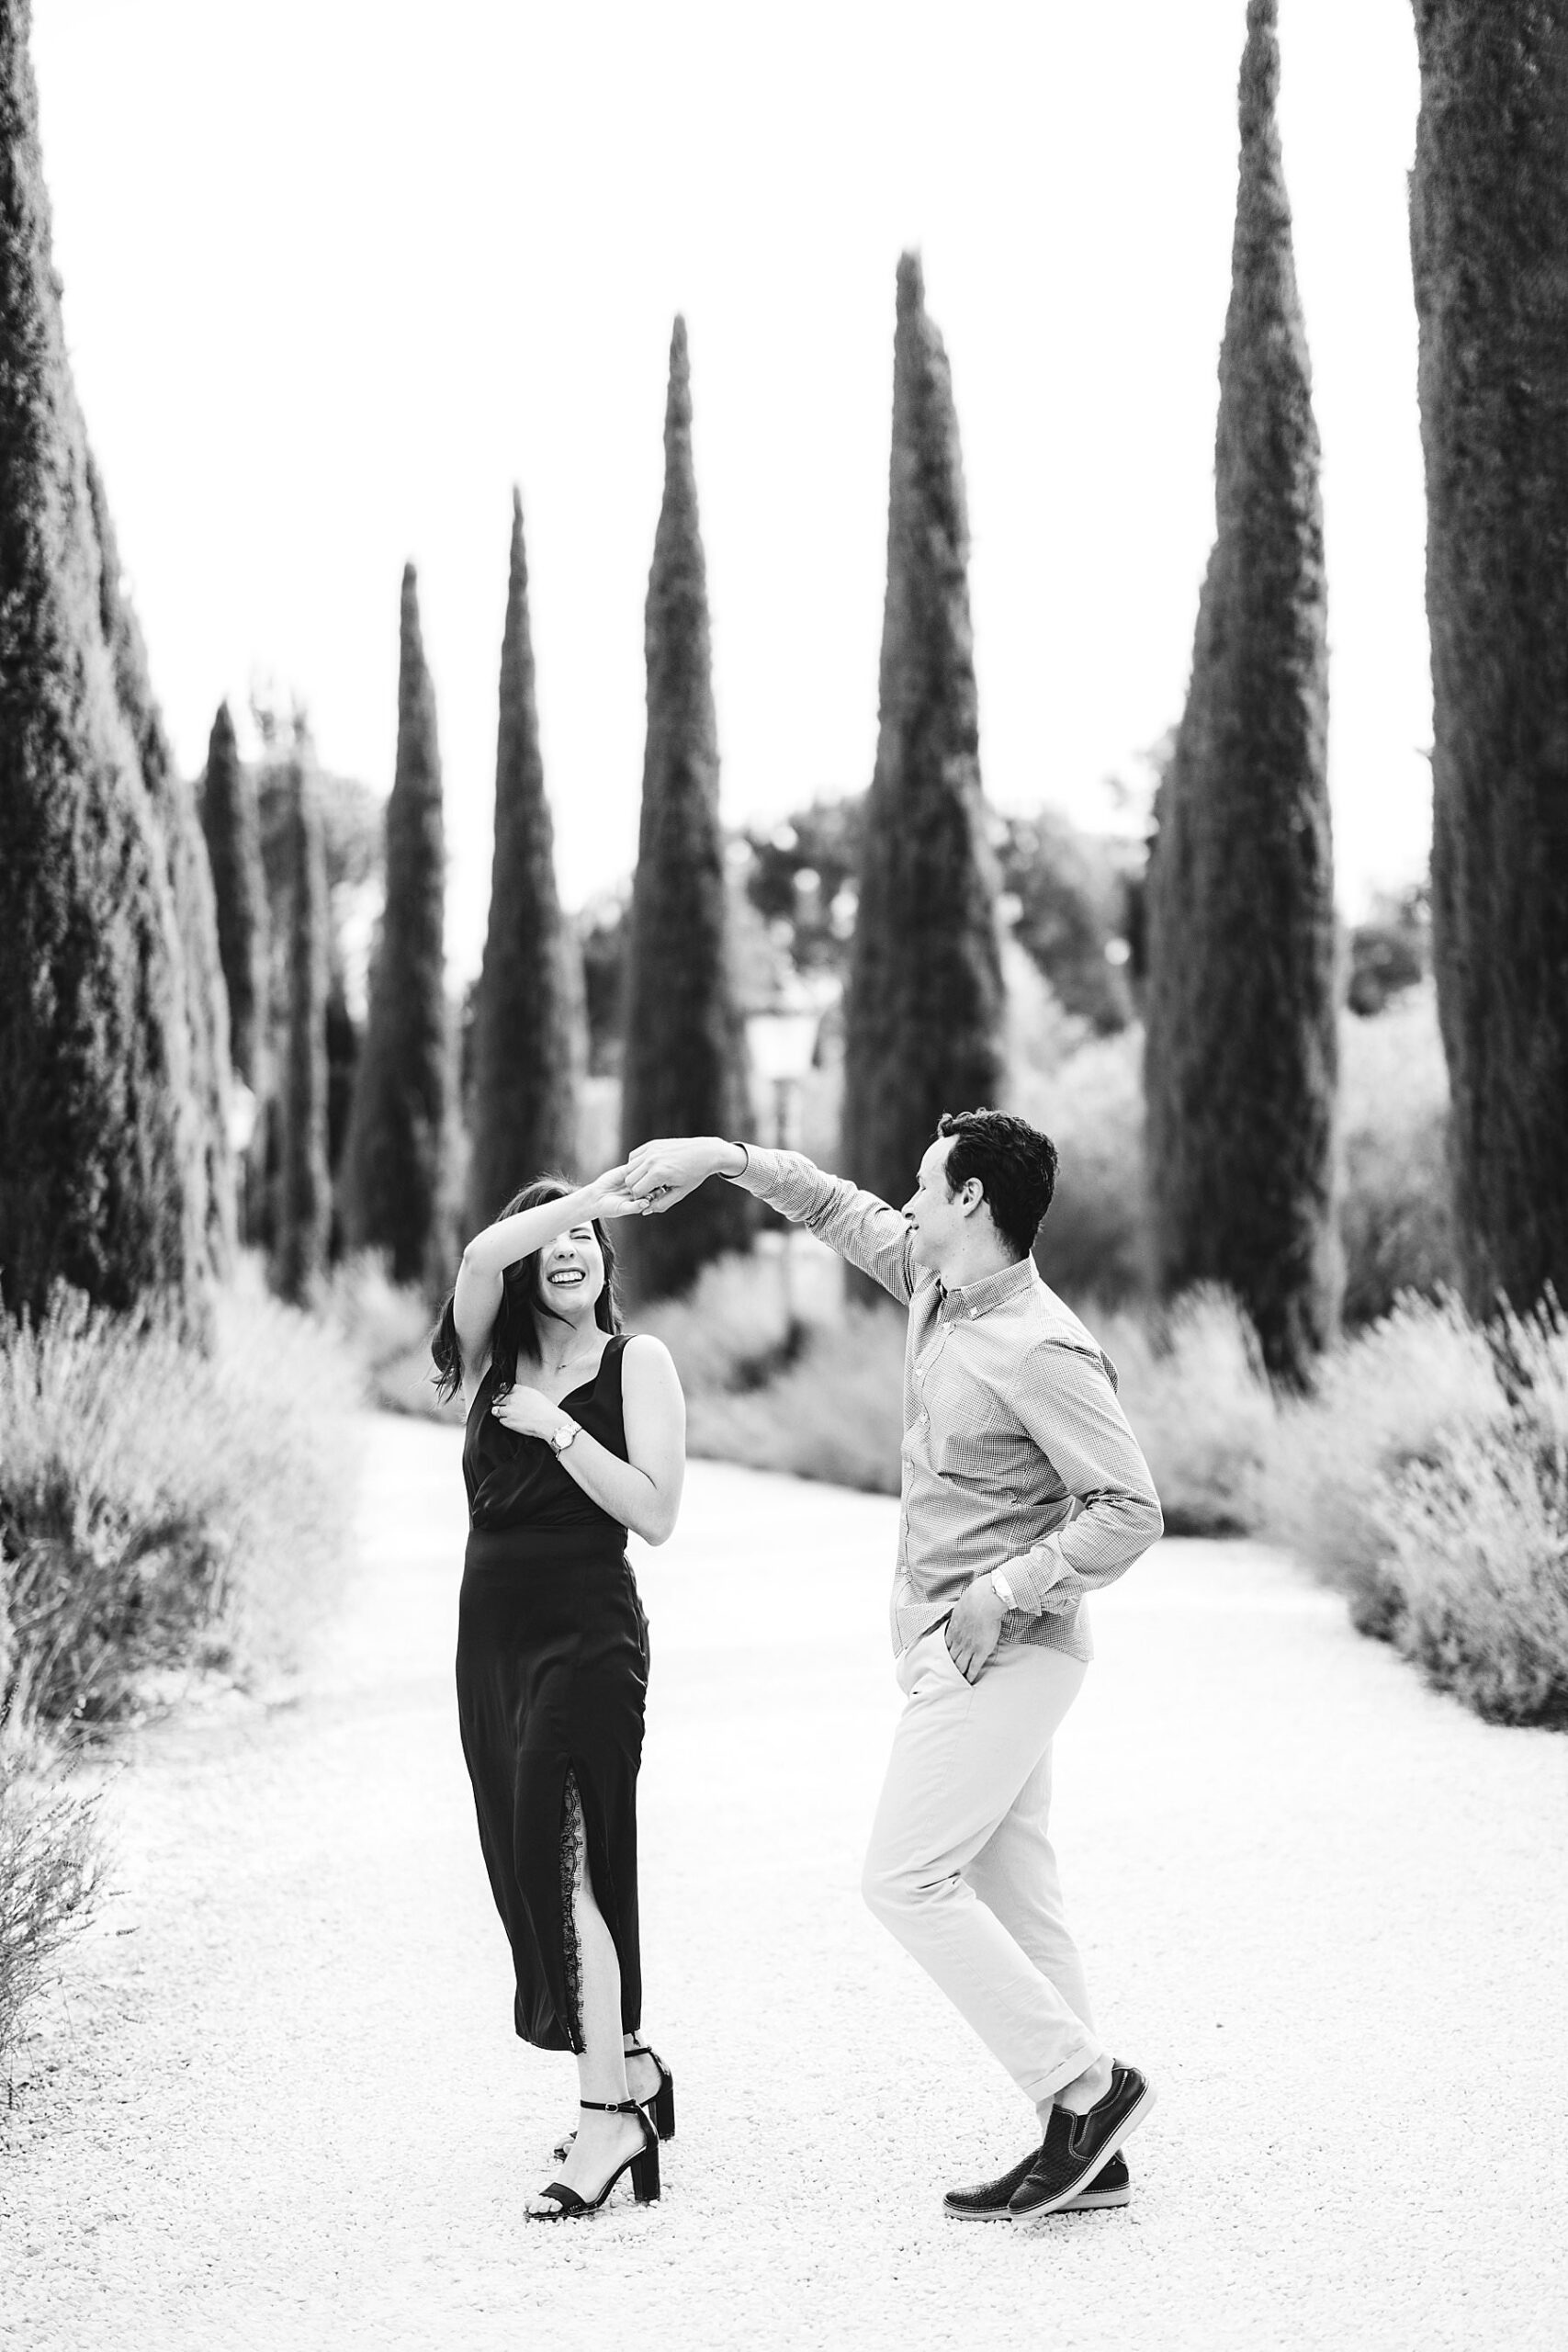 Celebrate the love with an exciting and fun engagement session in the unforgettable and evocative typical Tuscan resort like as the Borgo Santo Pietro